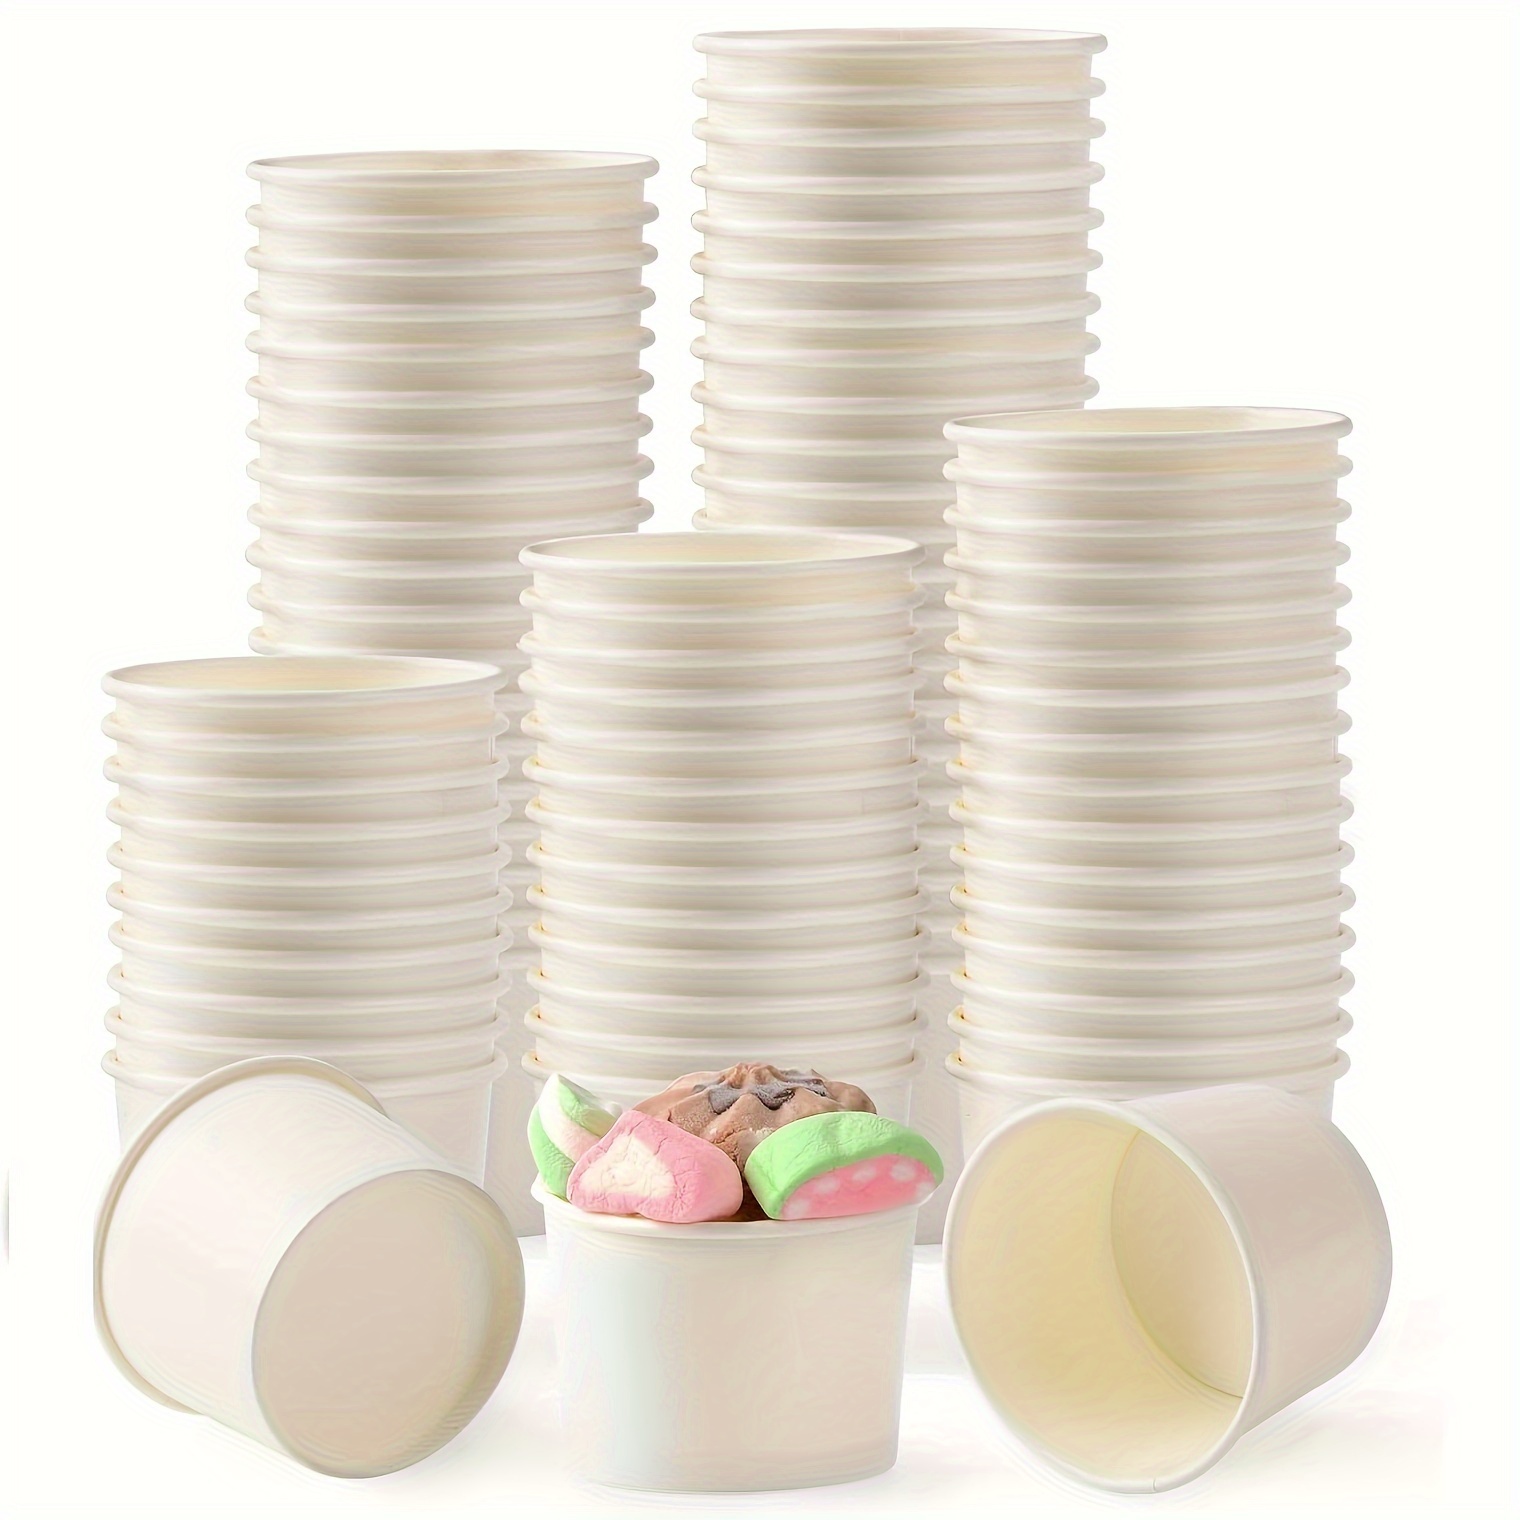 

50pcs, Ice Cream Cups, Disposable Dessert Bowls For Hot Or Cold Food, 225ml Cups For Sundae, Yogurt, Soup, Party Supplies, Tableware Accessories